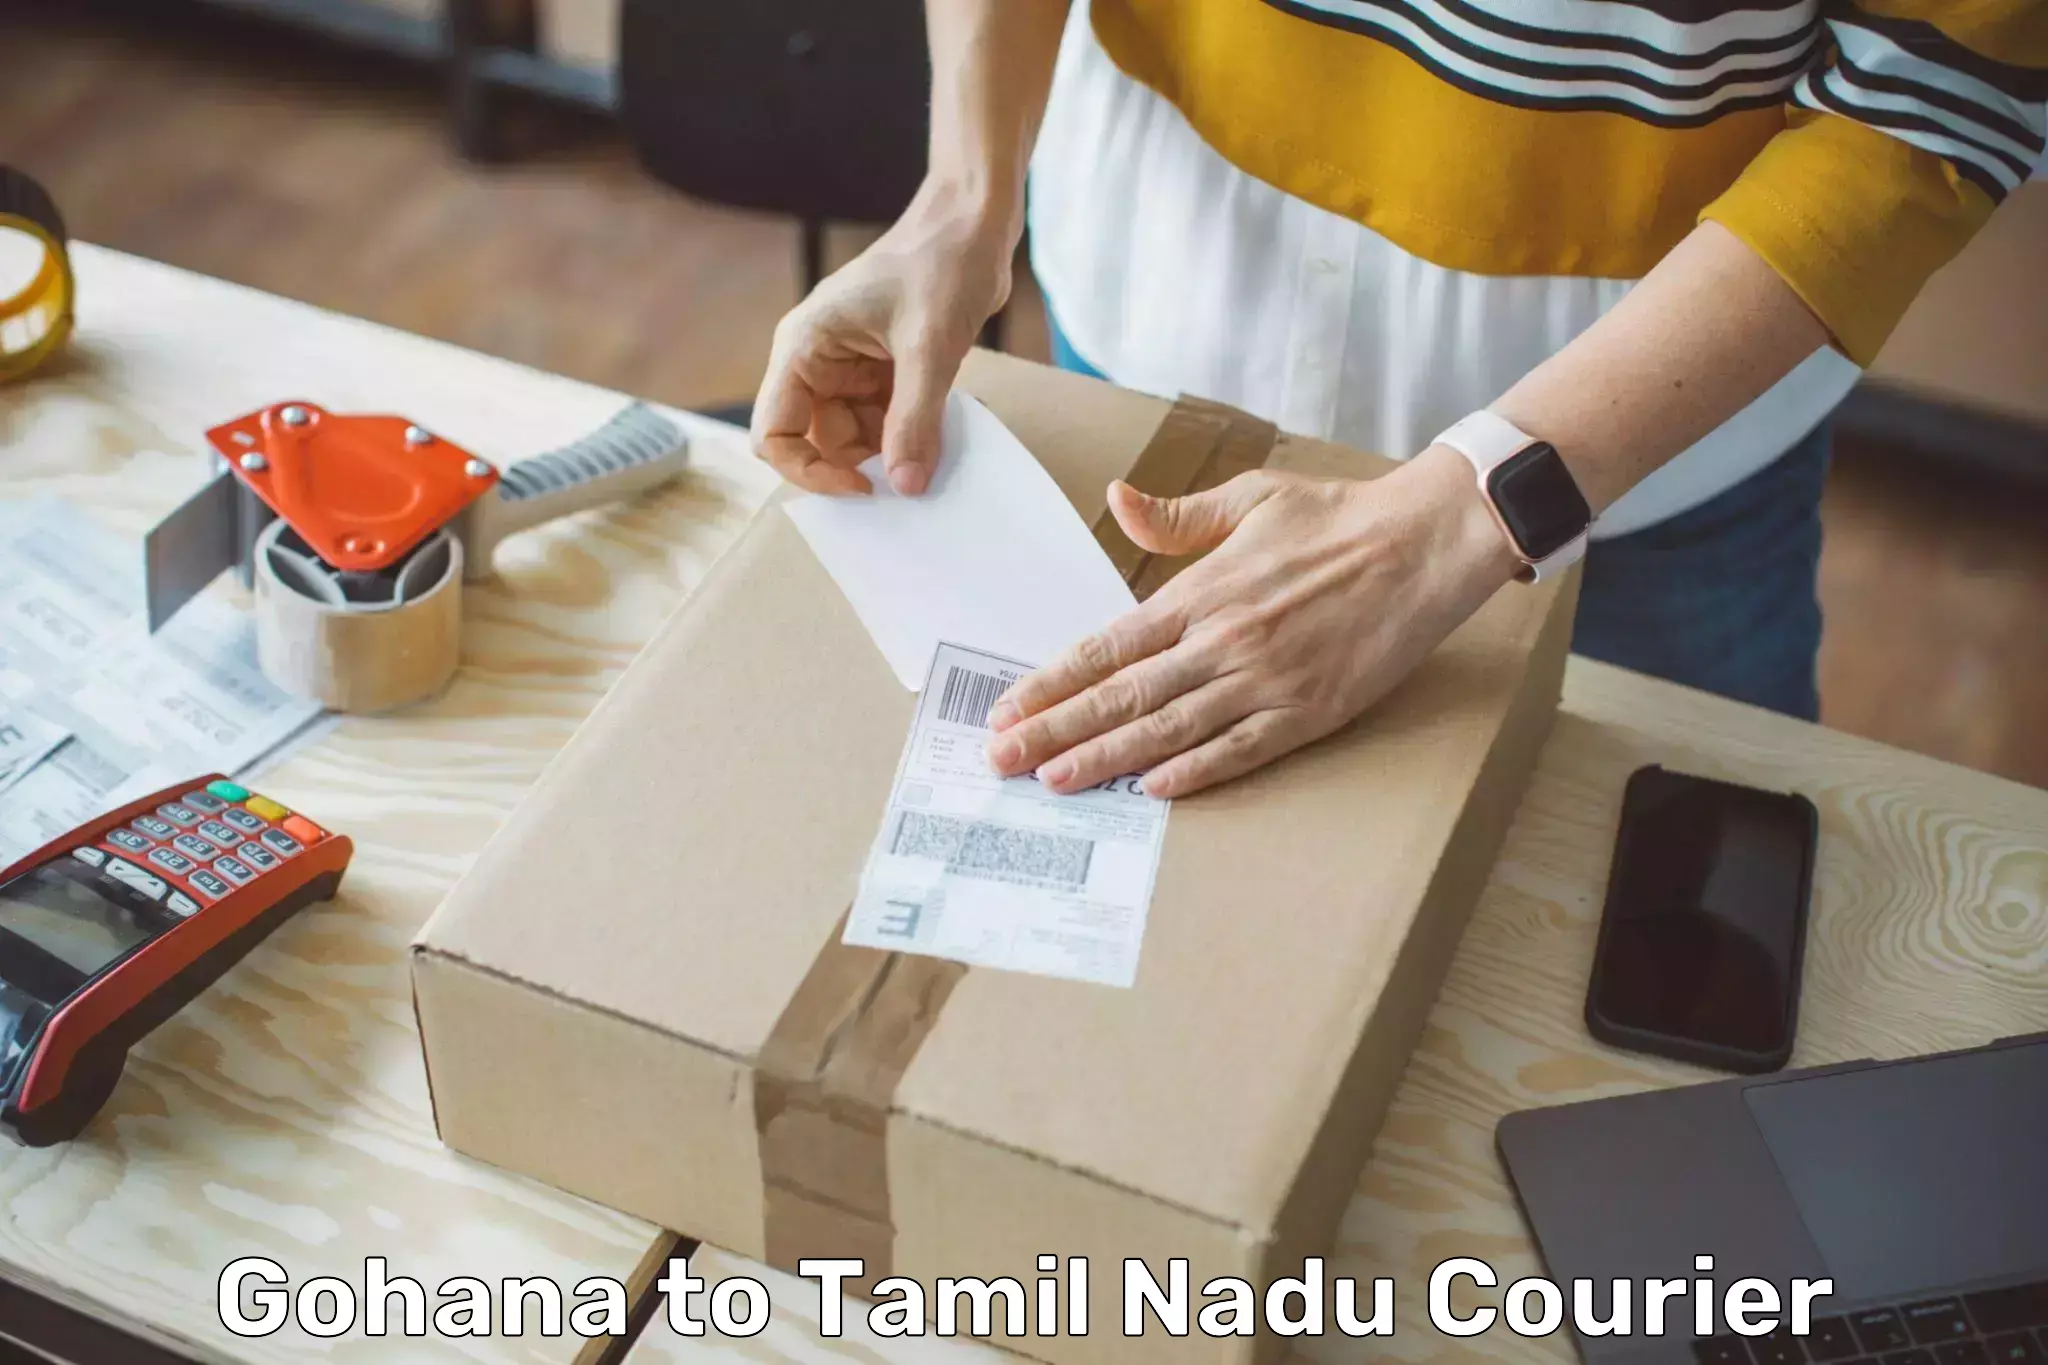 24-hour delivery options in Gohana to Tamil Nadu